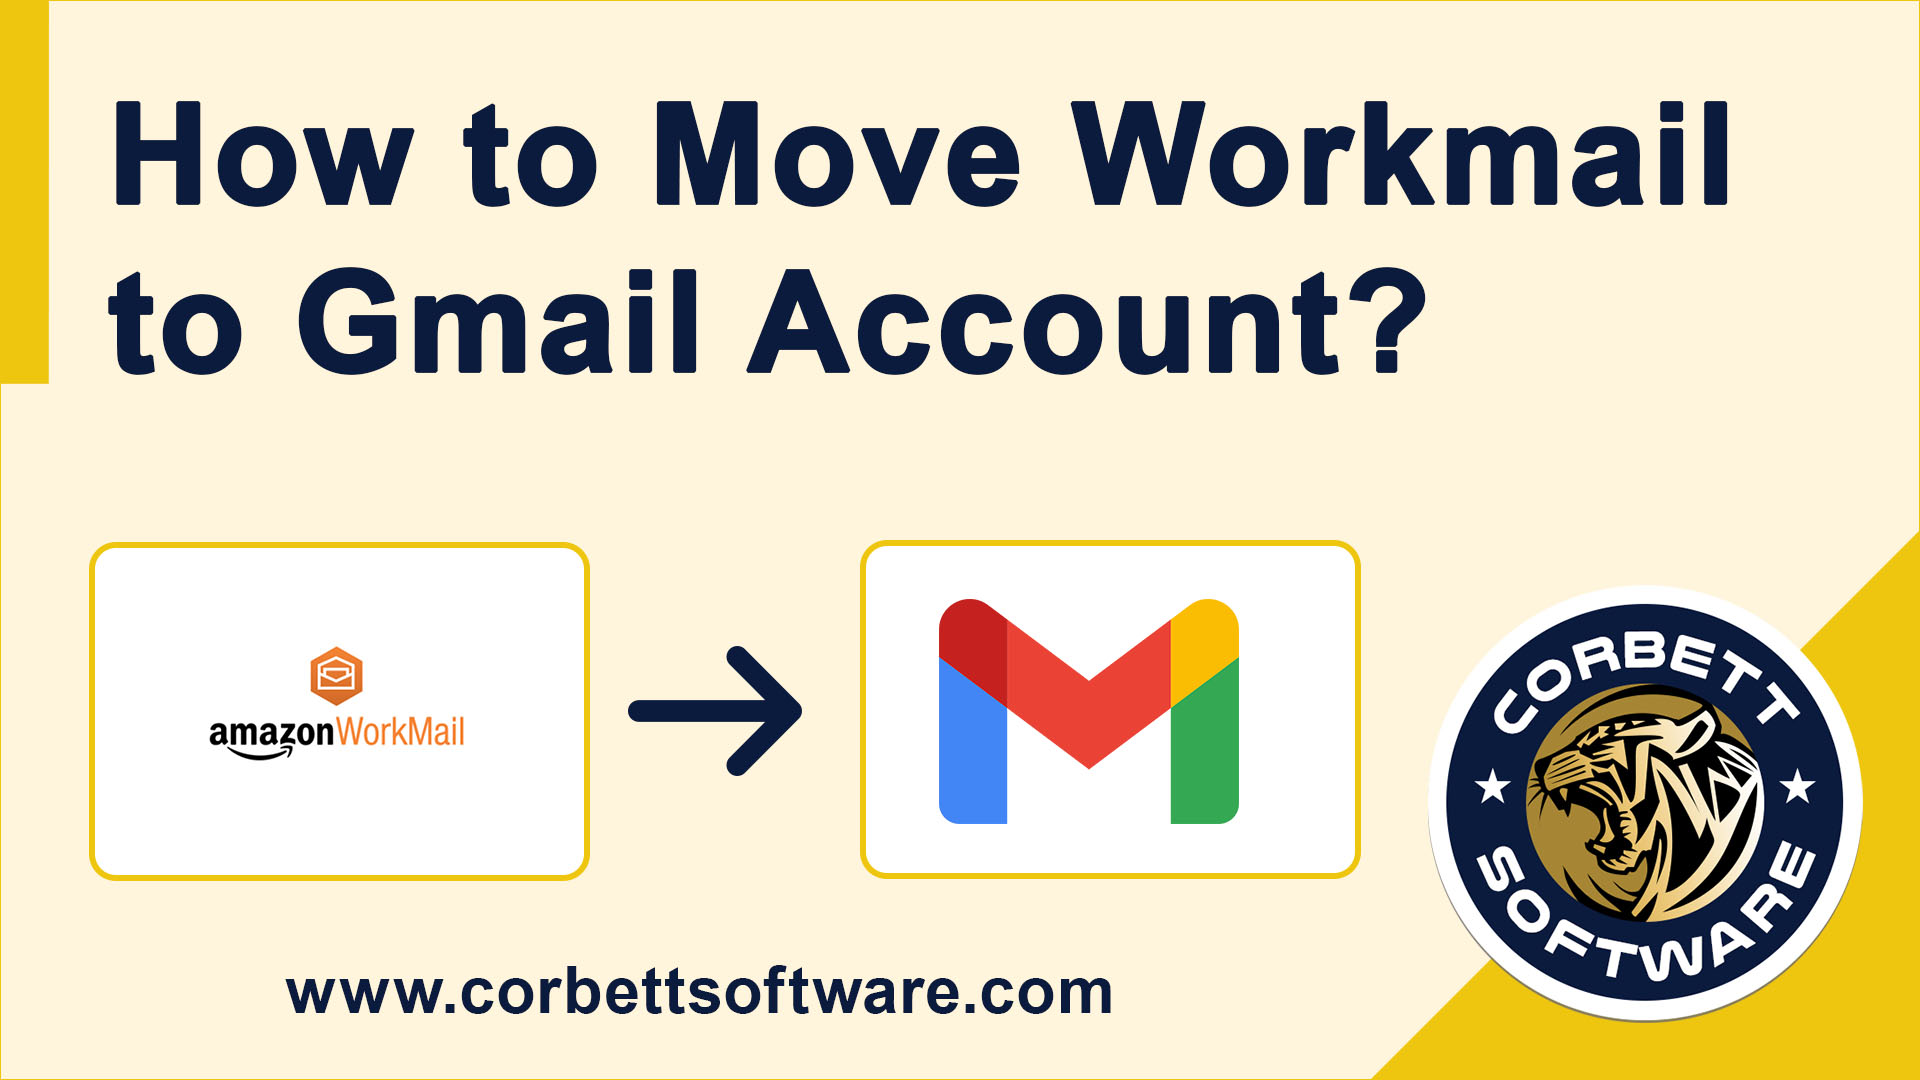 Workmail emails to Gmail